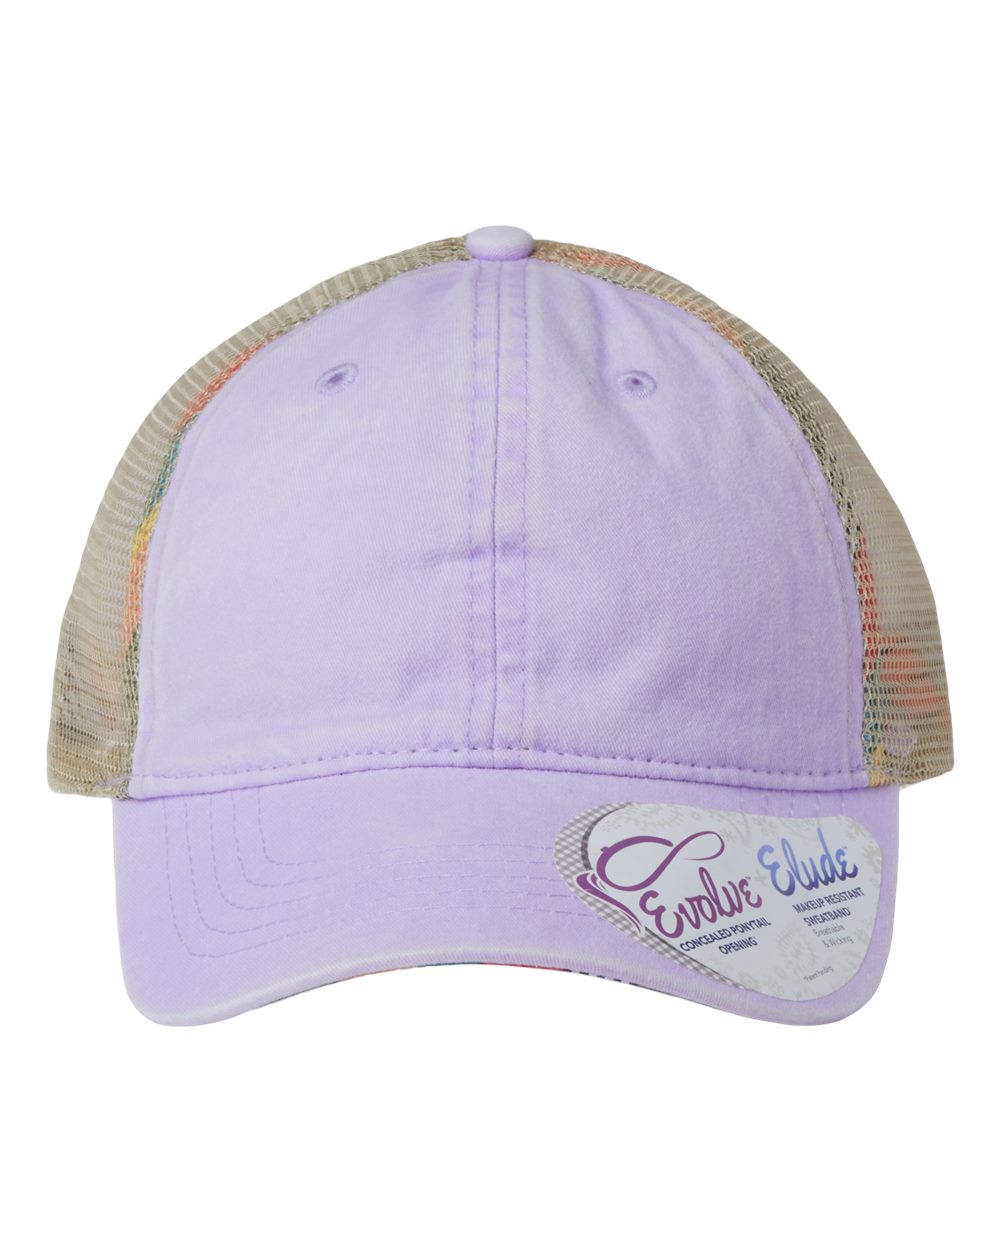 A women's washed mesh-back cap in lavender with a striped pattern on the front panel.